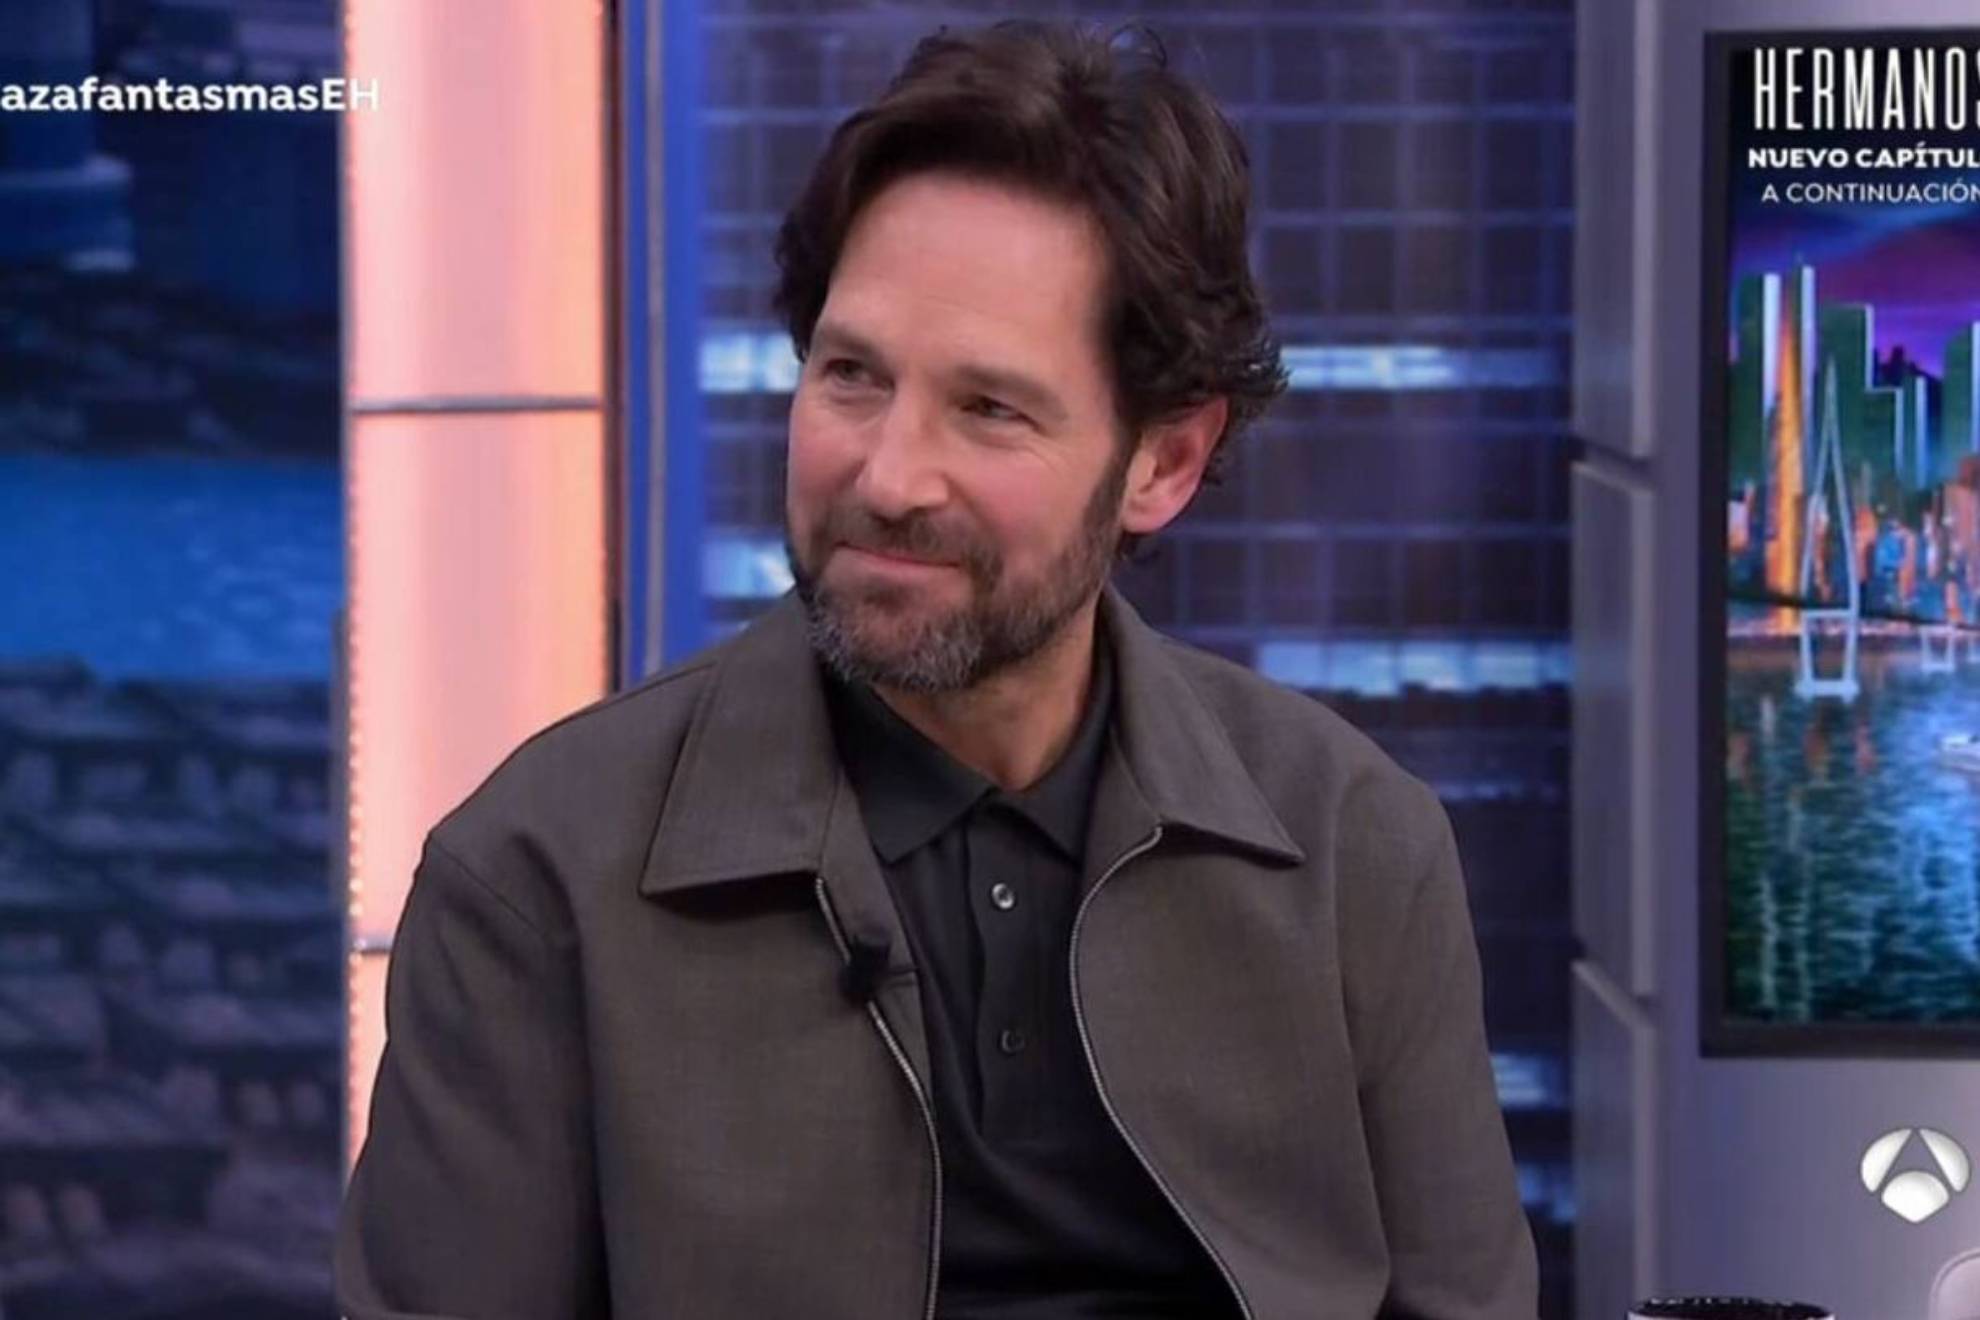 Paul Rudd recalls the incident he had with Jennifer Aniston in Friends: I immediately apologized to her